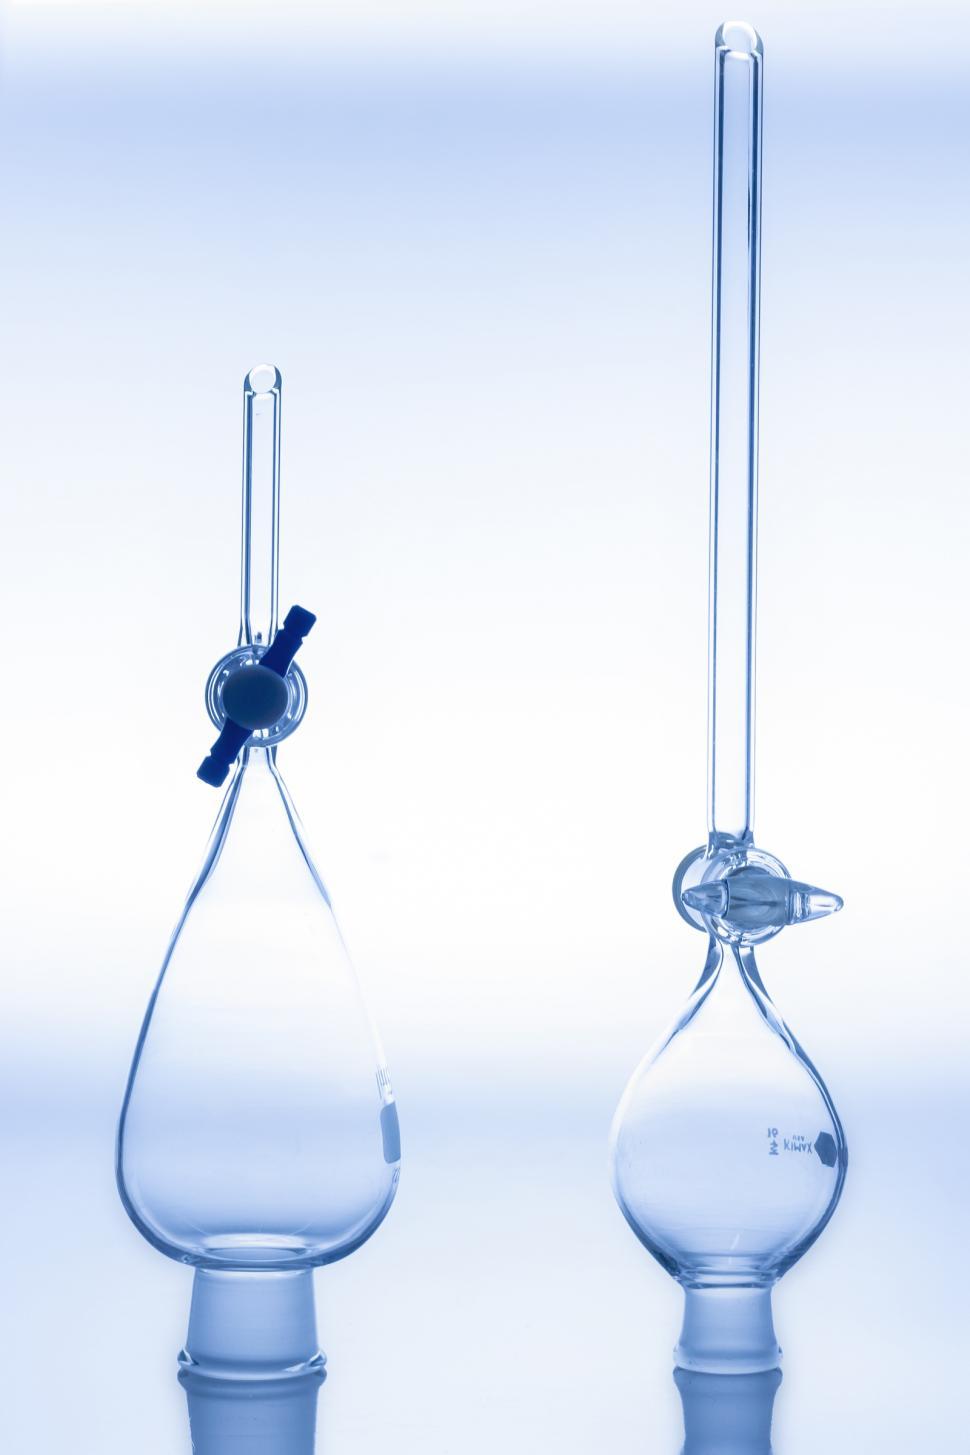 Free Image of Separatory funnels 